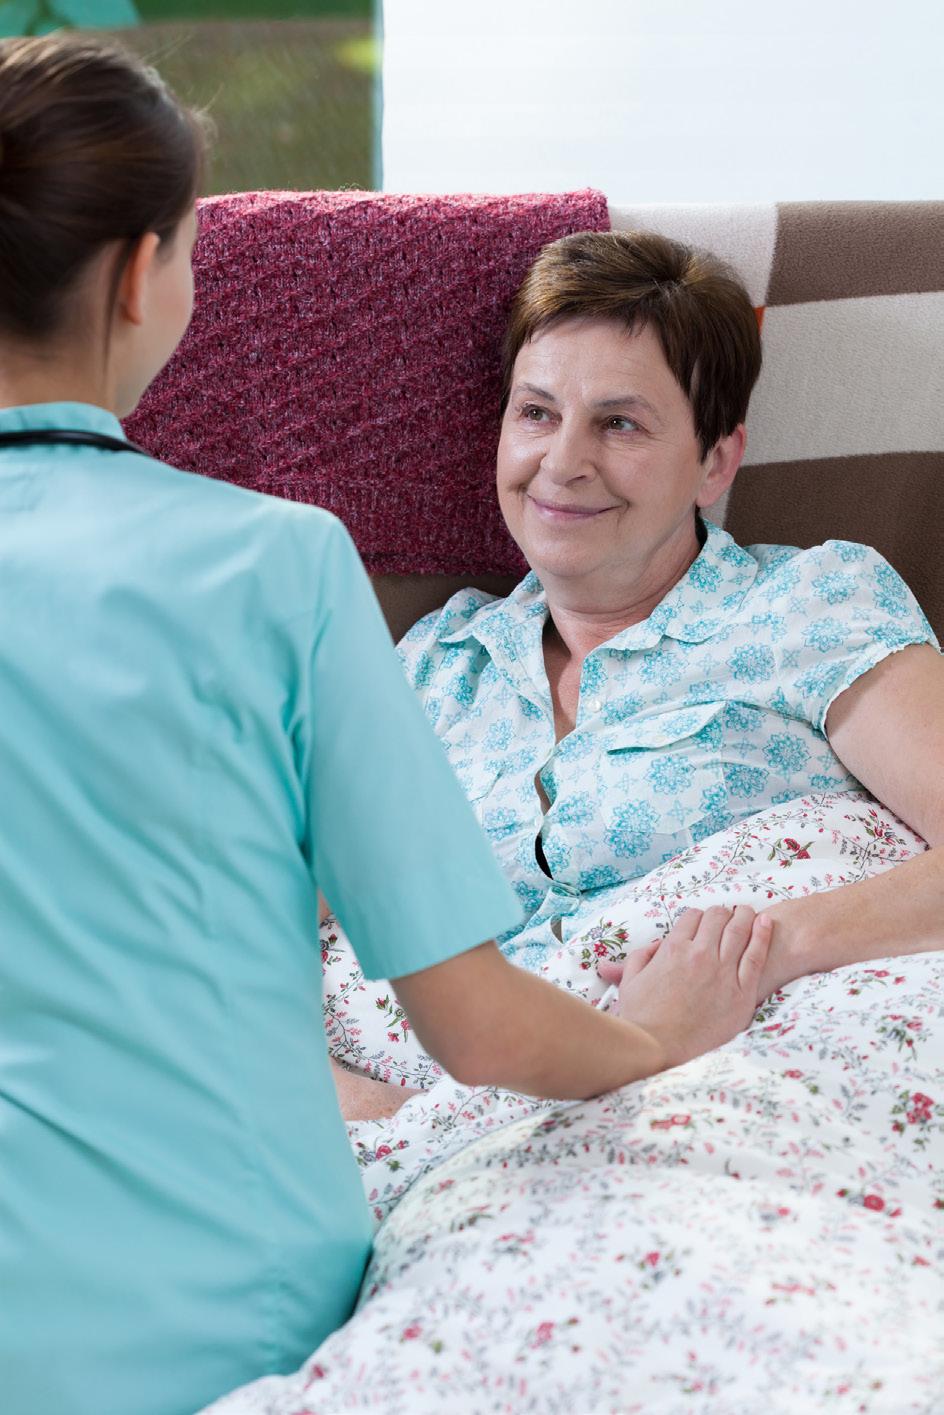 Features Case Study: ANP / CNP Role in Practice The Practice employed a Community Nurse Practitioner from 1 June whose remit was to support the GP On Call by carrying out first line assessment for